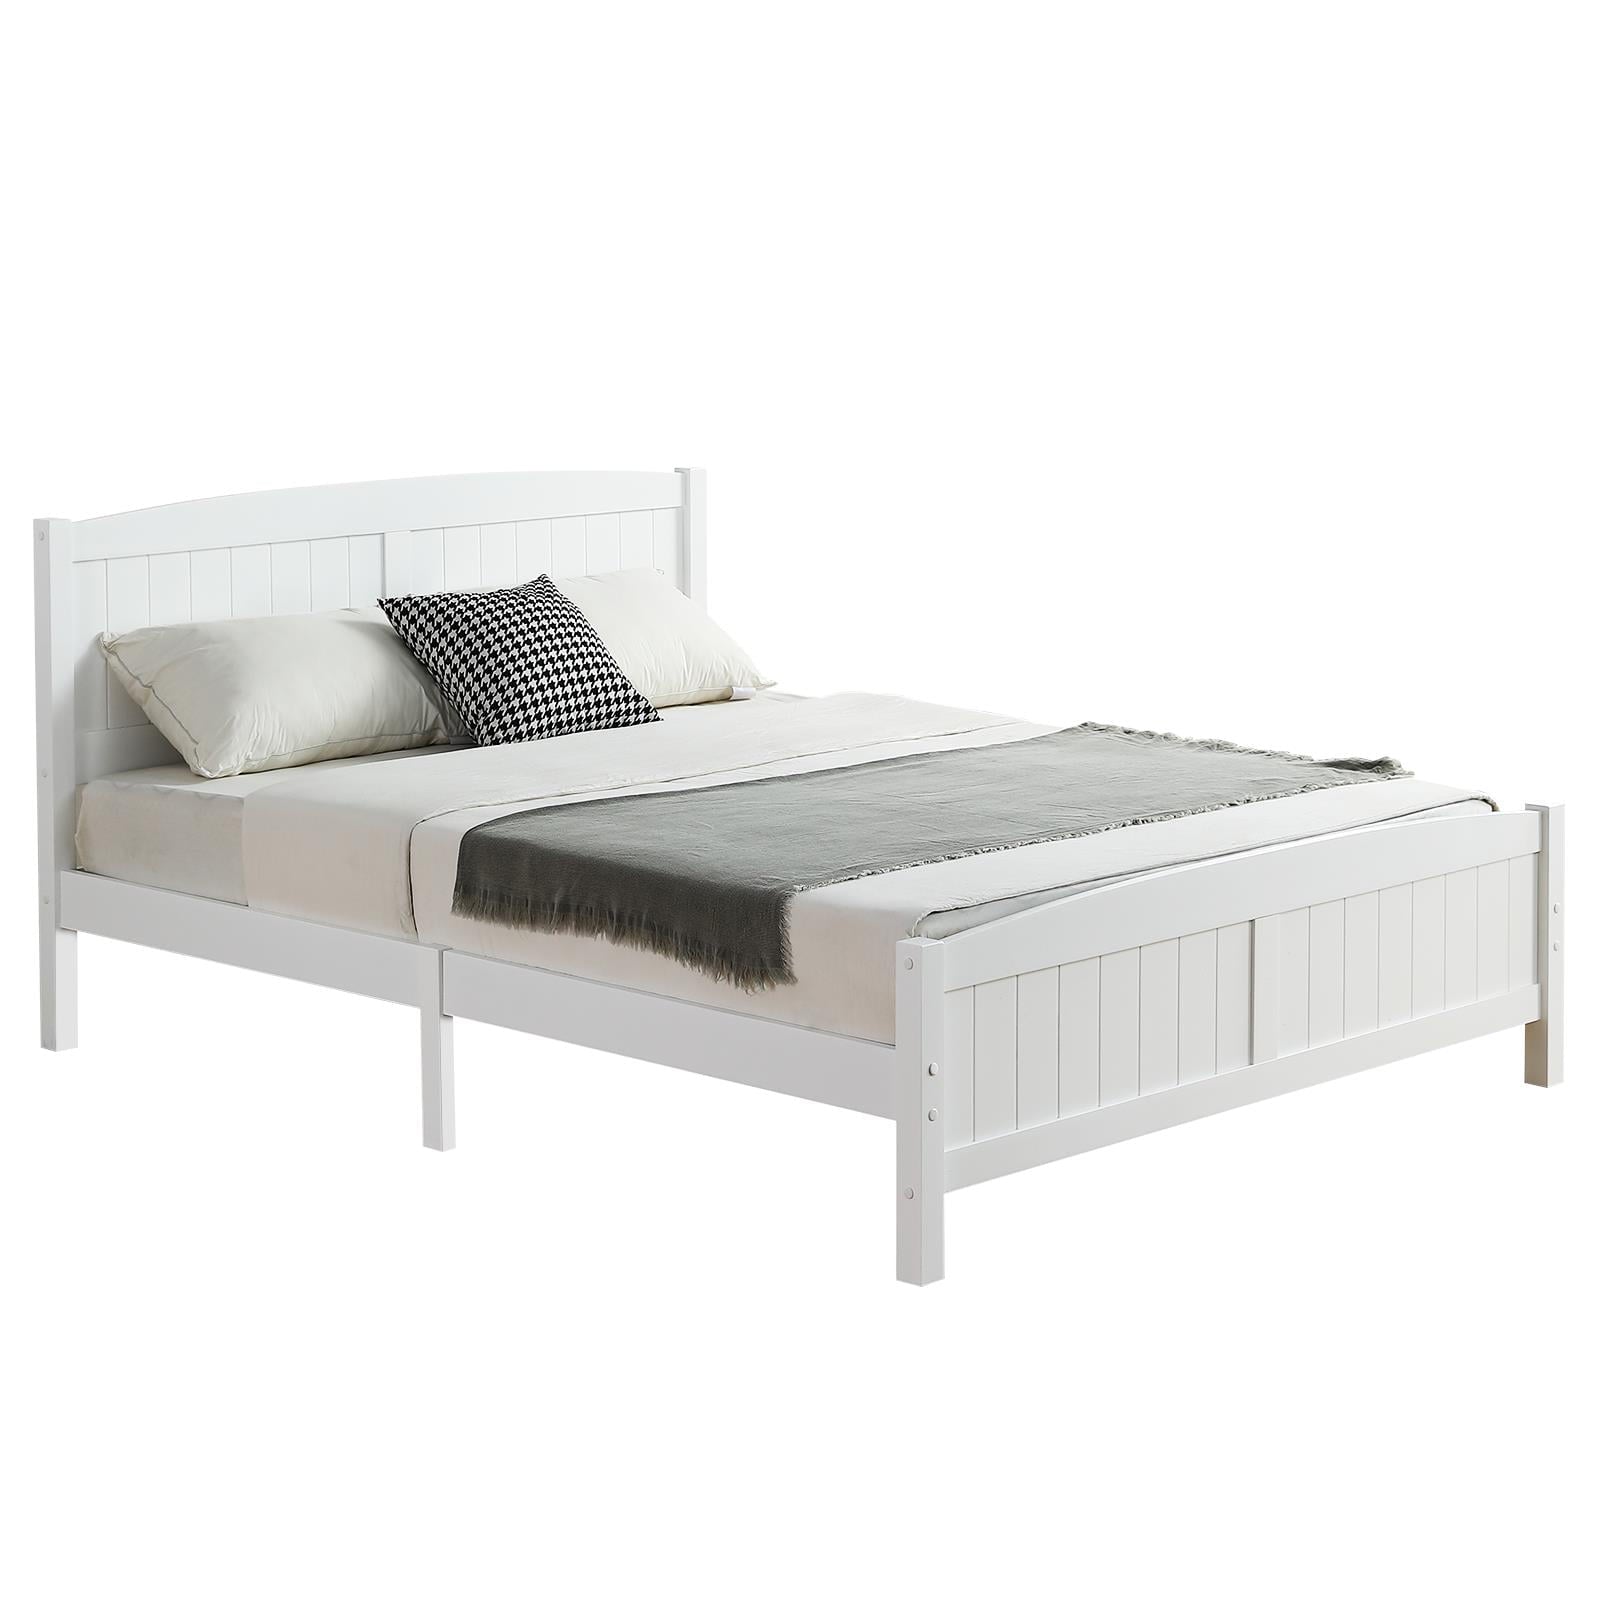 Zimtown Queen Bed Frame,Solid Pine Wood Kids Twin Platform Bed Frame, Bedroom Queen Bed with Headboard for Adults, White